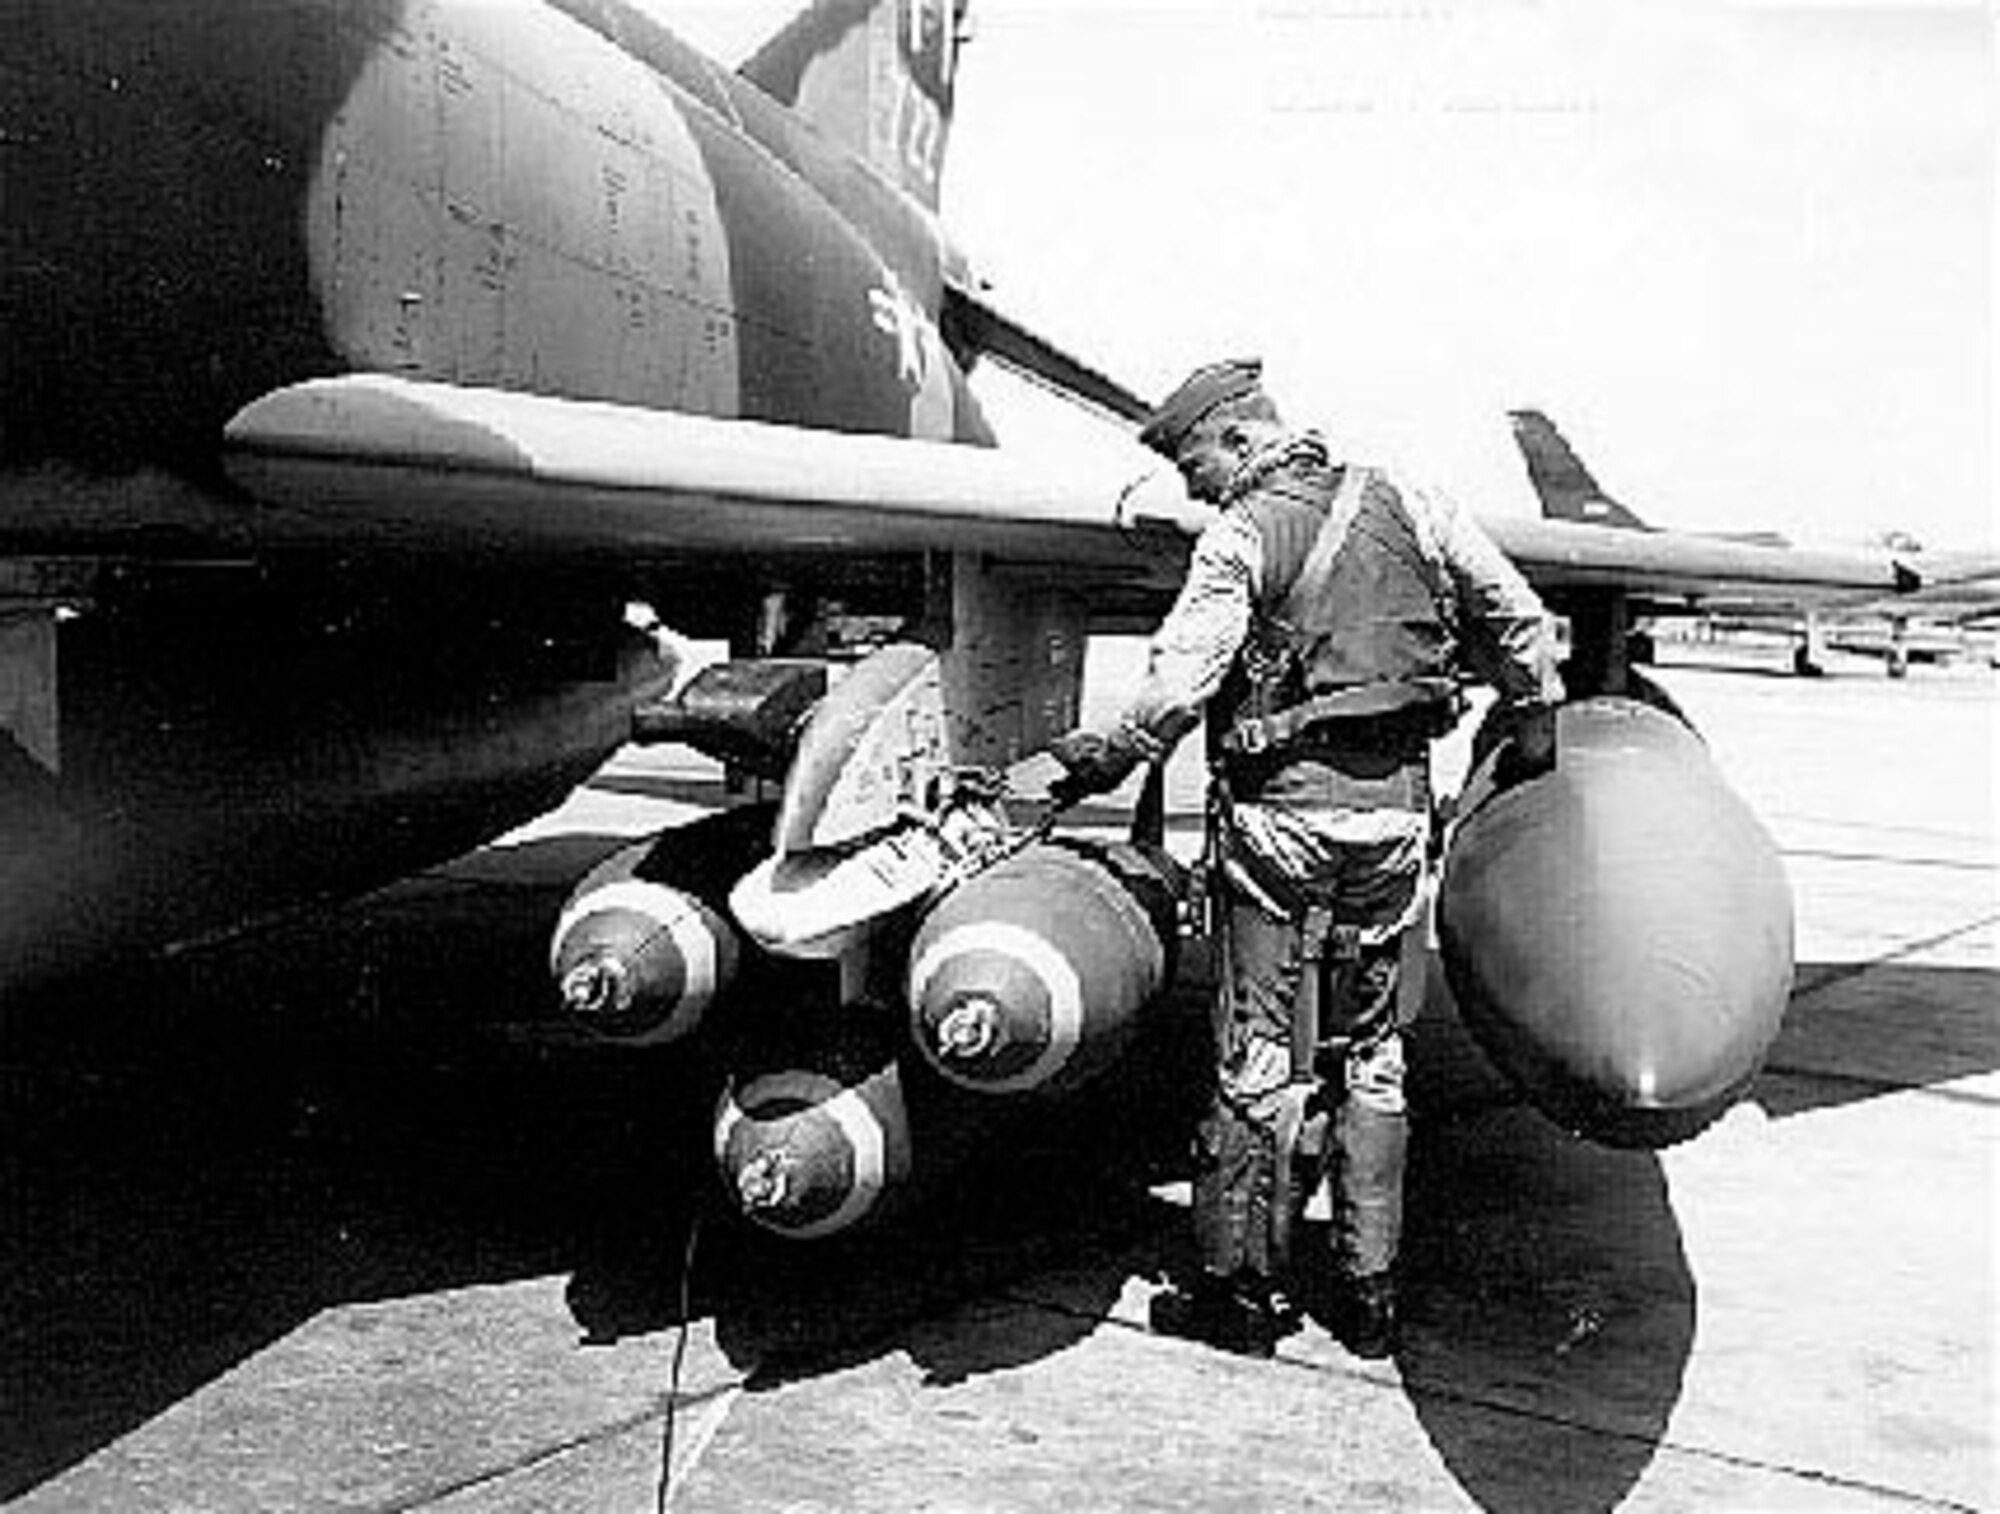 Col. Robin Olds checks munitions on his F-4C Phantom, Scat XXVII, prior to a mission.  He was the commander of the 8th Tactical Fighter Wing at Ubon Air Base, Thailand, and was credited with shooting down four enemy MiG aircraft in aerial combat over North Vietnam.  (U.S. Air Force photo)